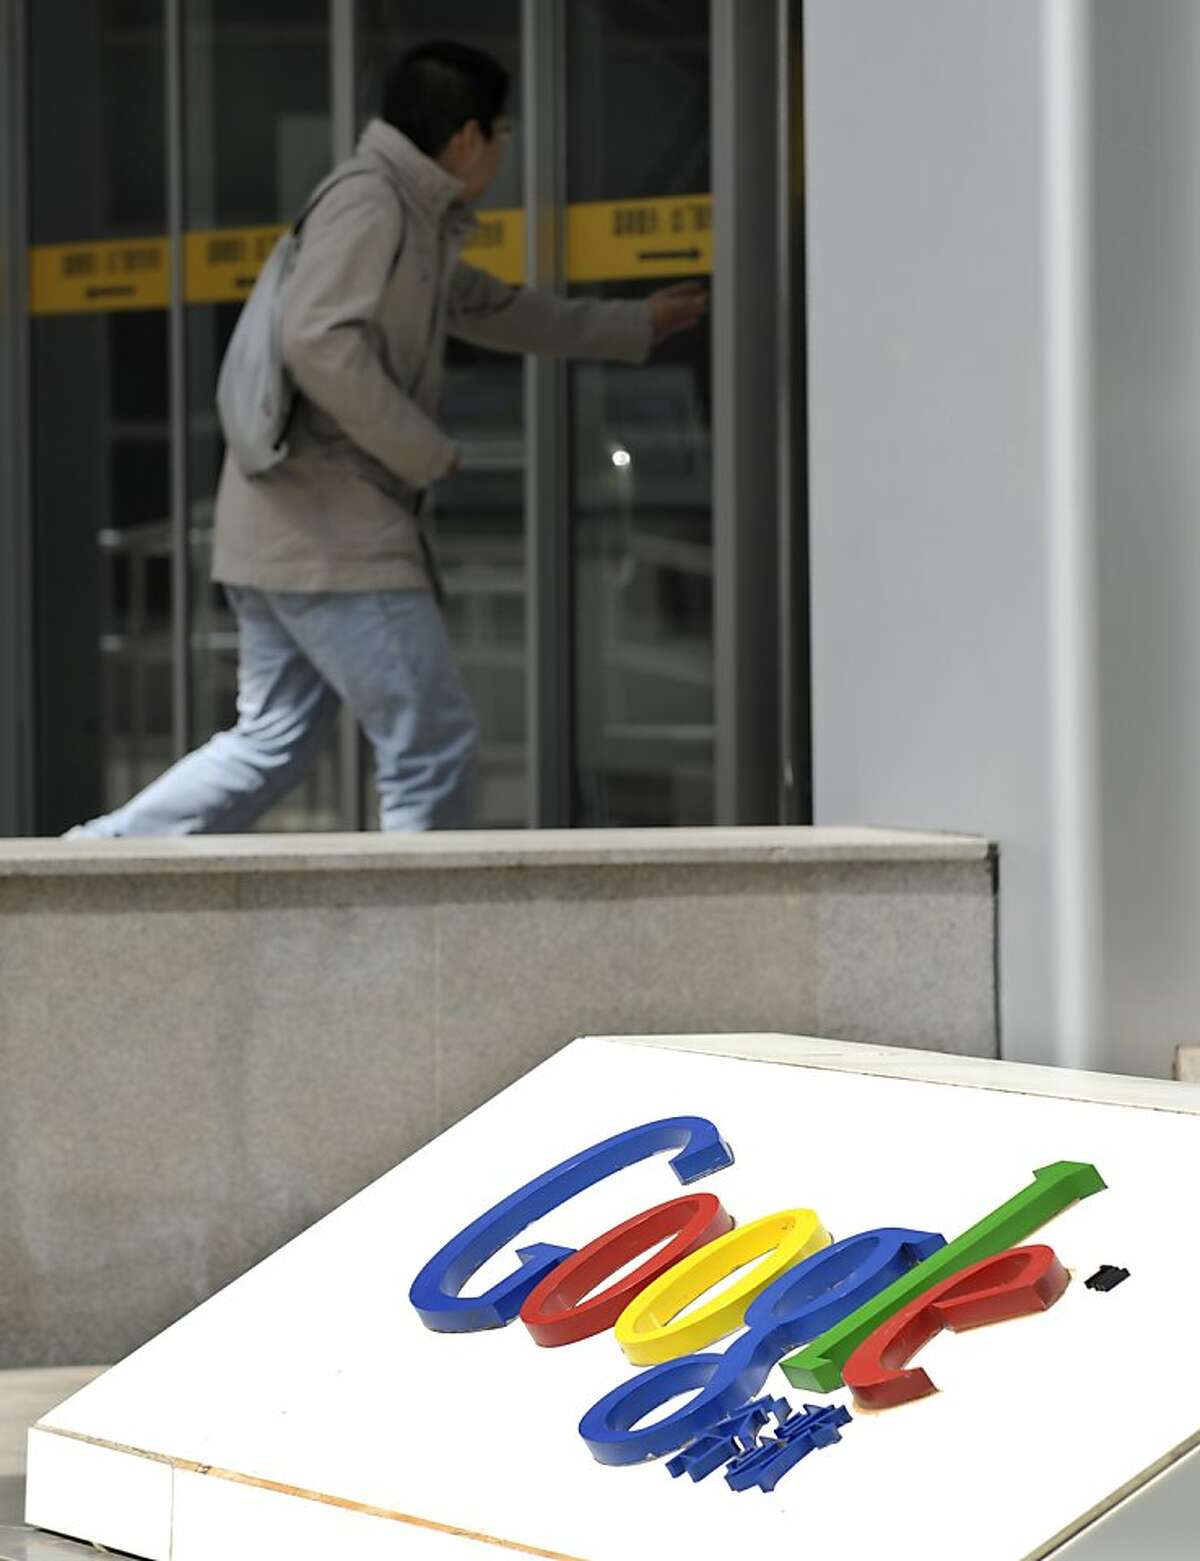 A man walks near the Google company logo outside the Google China headquarters in Beijing on March 21, 2010. Chinese media unleashed a torrent of criticism against Google after reports it would leave the country, with state news agency Xinhua alleging the company was linked to US intelligence. AFP PHOTO/ LIU Jin (Photo credit should read LIU JIN/AFP/Getty Images) Ran on: 03-22-2010 Google is still operating in China, but some reports say it will pull out next month. The company decided to stop censoring search results after it was hacked. Ran on: 04-23-2010 Photo caption Dummy text goes here. Dummy text goes here. Dummy text goes here. Dummy text goes here. Dummy text goes here. Dummy text goes here. Dummy text goes here. Dummy text goes here.###Photo: sector23_google_PH1269043200AFP###Live Caption:A man walks near the Google company logo outside the Google China headquarters in Beijing on March 21, 2010. Chinese media unleashed a torrent of criticism against Google after reports it would leave the country, with state news agency Xinhua alleging thecompany was linked to US intelligence.###Caption History:A man walks near the Google company logo outside the Google China headquarters in Beijing on March 21, 2010. Chinese media unleashed a torrent of criticism against Google after reports it would leave the country, with state news agency Xinhua alleging the company was linked to US intelligence. AFP PHOTO- LIU Jin (Photo credit should read LIU JIN-AFP-Getty Images)____Ran on: 03-22-2010__Google is still operating in China, but some reports say it will pull out next month. The company decided to stop censoring search results after it was hacked.###Notes:###Special Instructions: